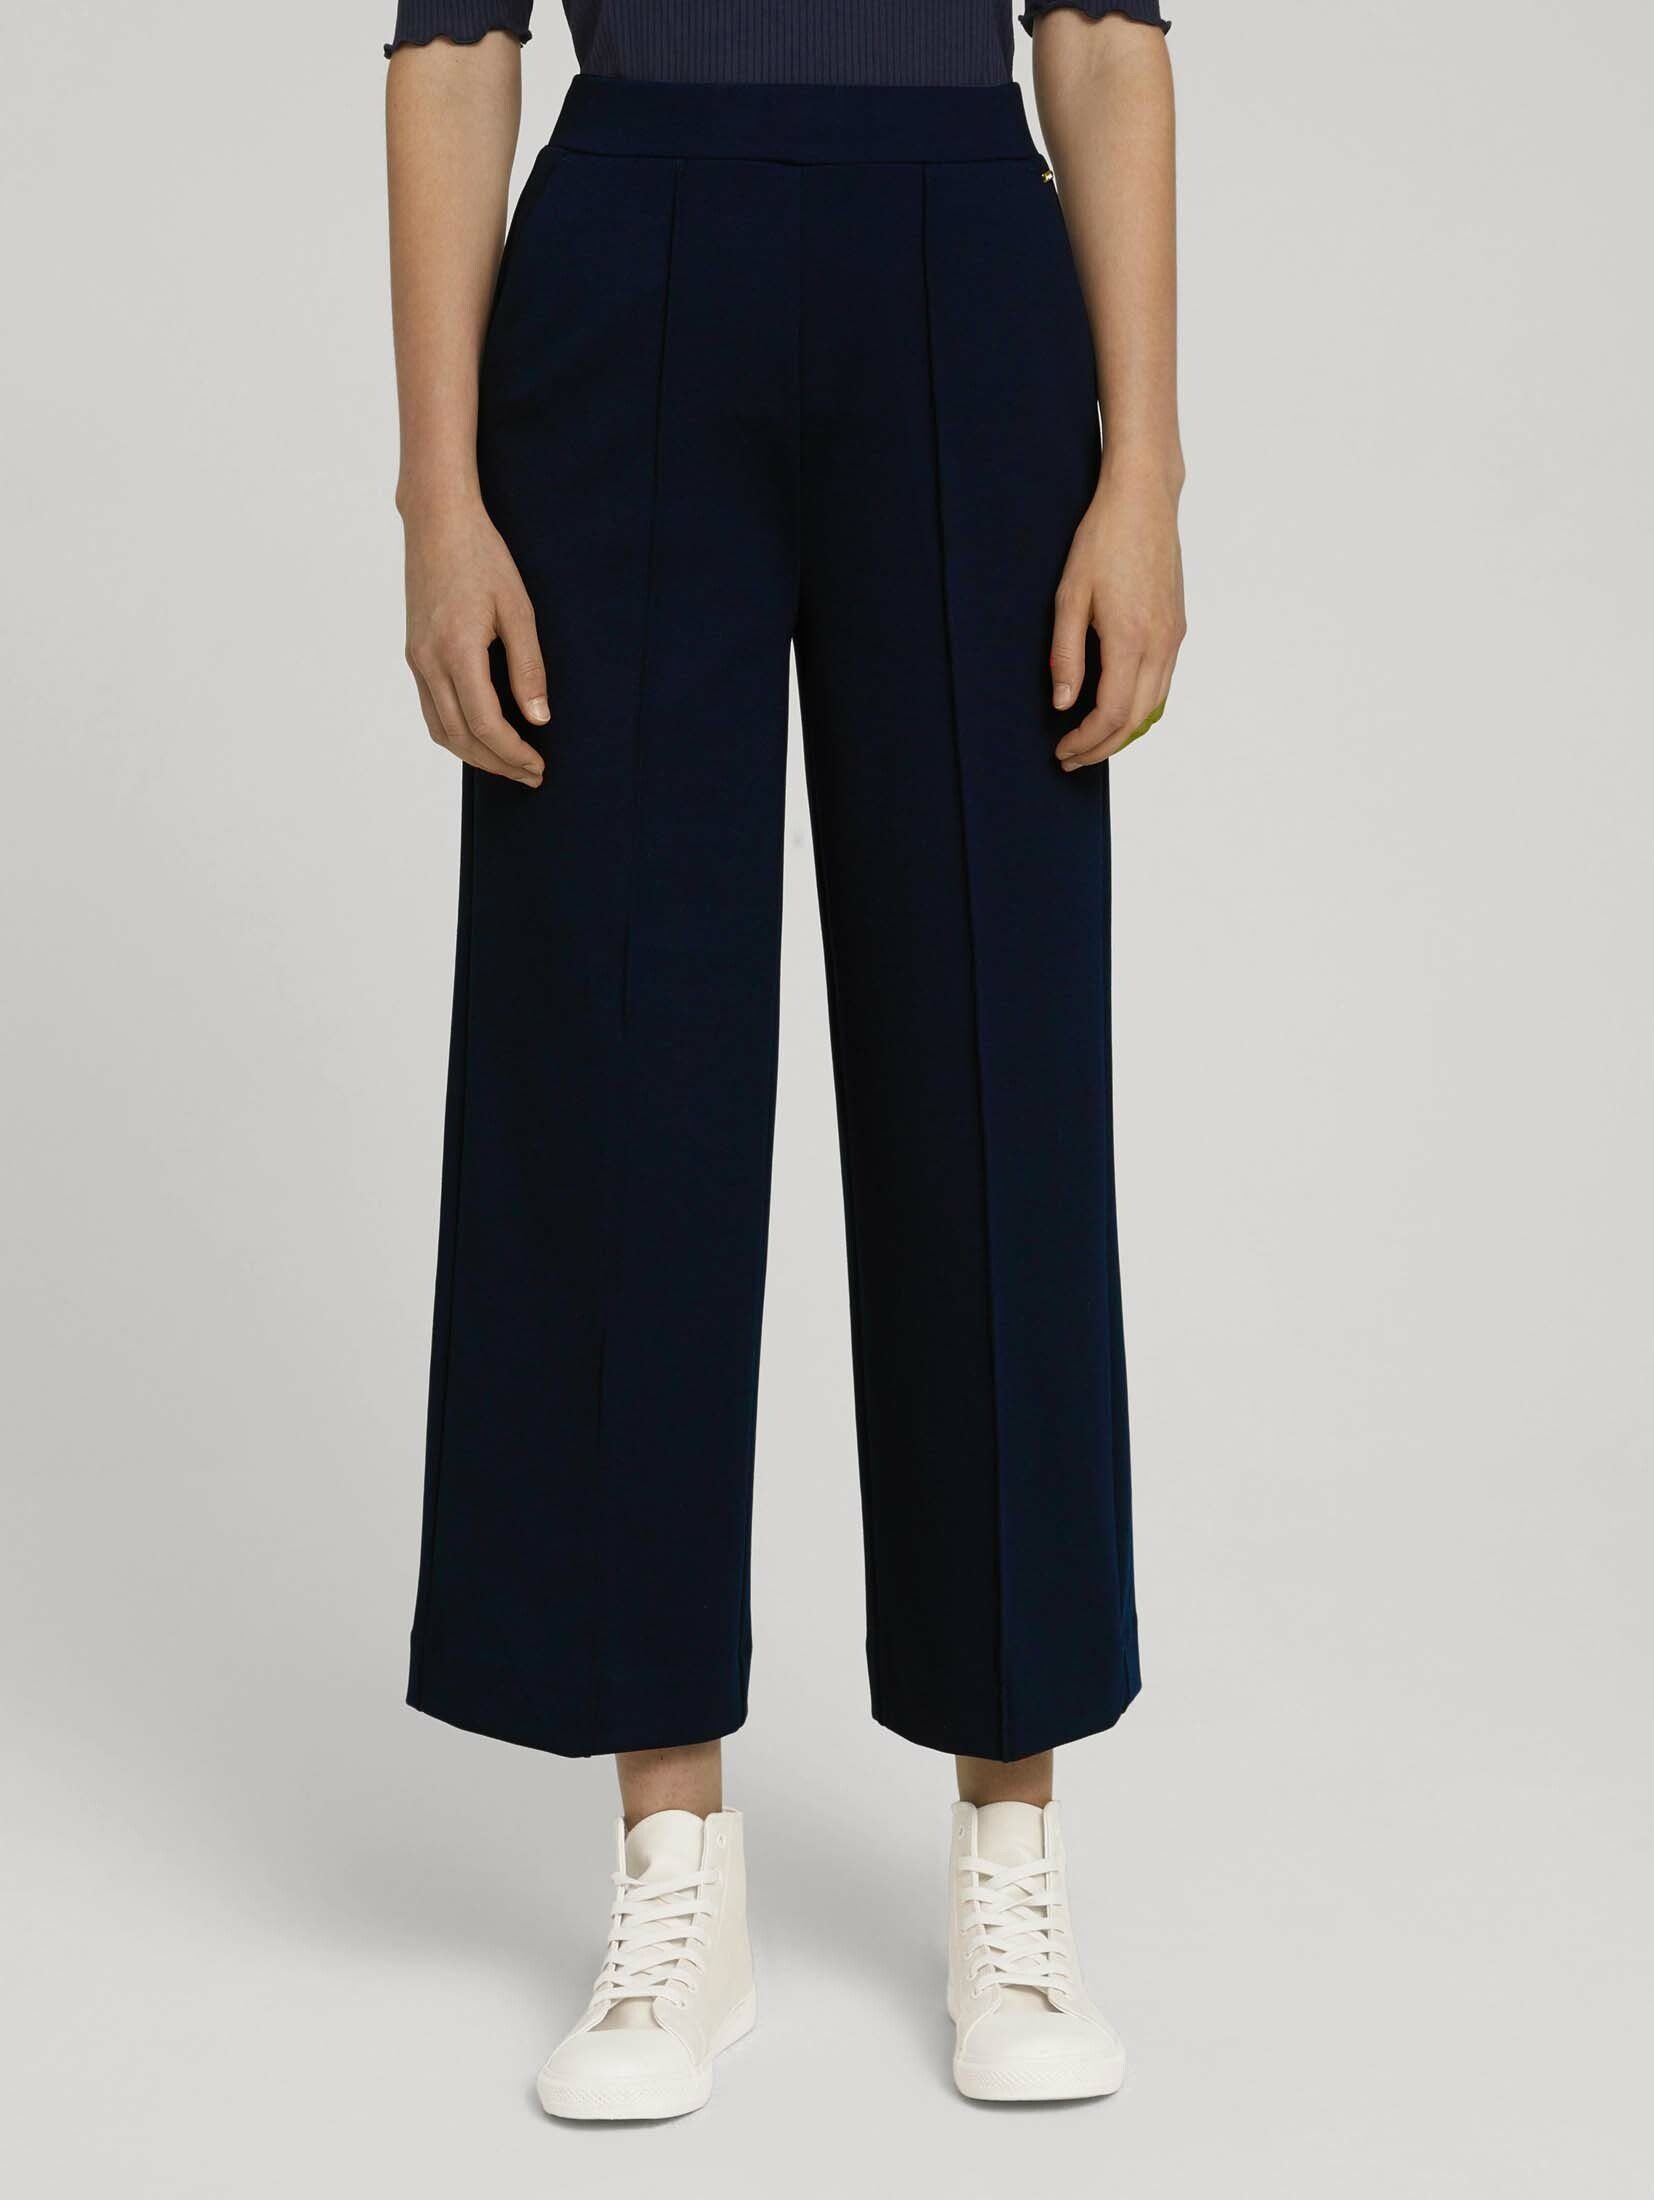 TOM TAILOR Denim Culotte »Relaxed Culotte Hose mit recyceltem Polyester«  online kaufen | OTTO